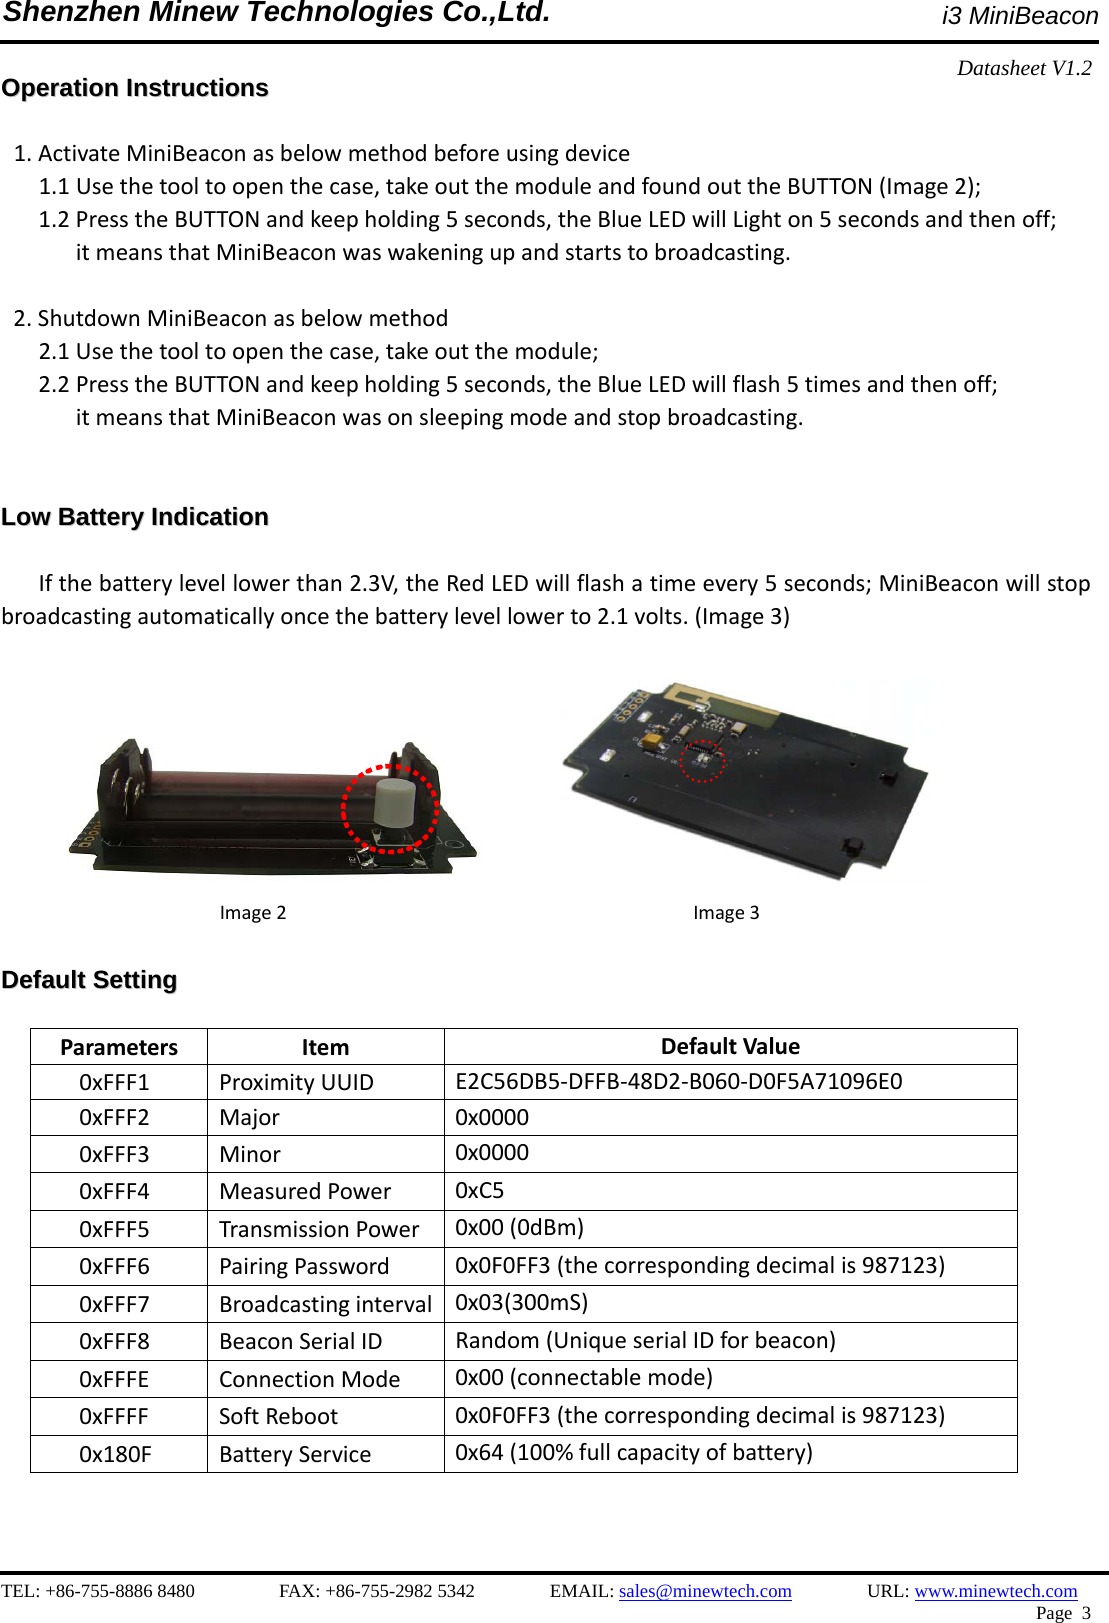    TEL: +86-755-8886 8480         FAX: +86-755-2982 5342        EMAIL: sales@minewtech.com        URL: www.minewtech.com  Page 3  Shenzhen Minew Technologies Co.,Ltd.                                              i3 MiniBeacon Datasheet V1.2   OOppeerraattiioonn  IInnssttrruuccttiioonnss   1.ActivateMiniBeaconasbelowmethodbeforeusingdevice1.1Usethetooltoopenthecase,takeoutthemoduleandfoundouttheBUTTON(Image2);1.2PresstheBUTTONandkeepholding5seconds,theBlueLEDwillLighton5secondsandthenoff;itmeansthatMiniBeaconwaswakeningupandstartstobroadcasting.2.ShutdownMiniBeaconasbelowmethod2.1Usethetooltoopenthecase,takeoutthemodule;2.2PresstheBUTTONandkeepholding5seconds,theBlueLEDwillflash5timesandthenoff;itmeansthatMiniBeaconwasonsleepingmodeandstopbroadcasting.LLooww  BBaatttteerryy  IInnddiiccaattiioonn  Ifthebatterylevellowerthan2.3V,theRedLEDwillflashatimeevery5seconds;MiniBeaconwillstopbroadcastingautomaticallyoncethebatterylevellowerto2.1volts.(Image3)  Image2Image3DDeeffaauulltt  SSeettttiinngg                                                           ParametersItemDefaultValue0xFFF1ProximityUUIDE2C56DB5‐DFFB‐48D2‐B060‐D0F5A71096E00xFFF2Major0x00000xFFF3Minor0x00000xFFF4MeasuredPower0xC50xFFF5TransmissionPower0x00(0dBm)0xFFF6PairingPassword0x0F0FF3(thecorrespondingdecimalis987123)0xFFF7Broadcastinginterval0x03(300mS)0xFFF8BeaconSerialIDRandom(UniqueserialIDforbeacon)0xFFFEConnectionMode0x00(connectablemode)0xFFFFSoftReboot 0x0F0FF3(thecorrespondingdecimalis987123)0x180FBatteryService0x64(100%fullcapacityofbattery)  